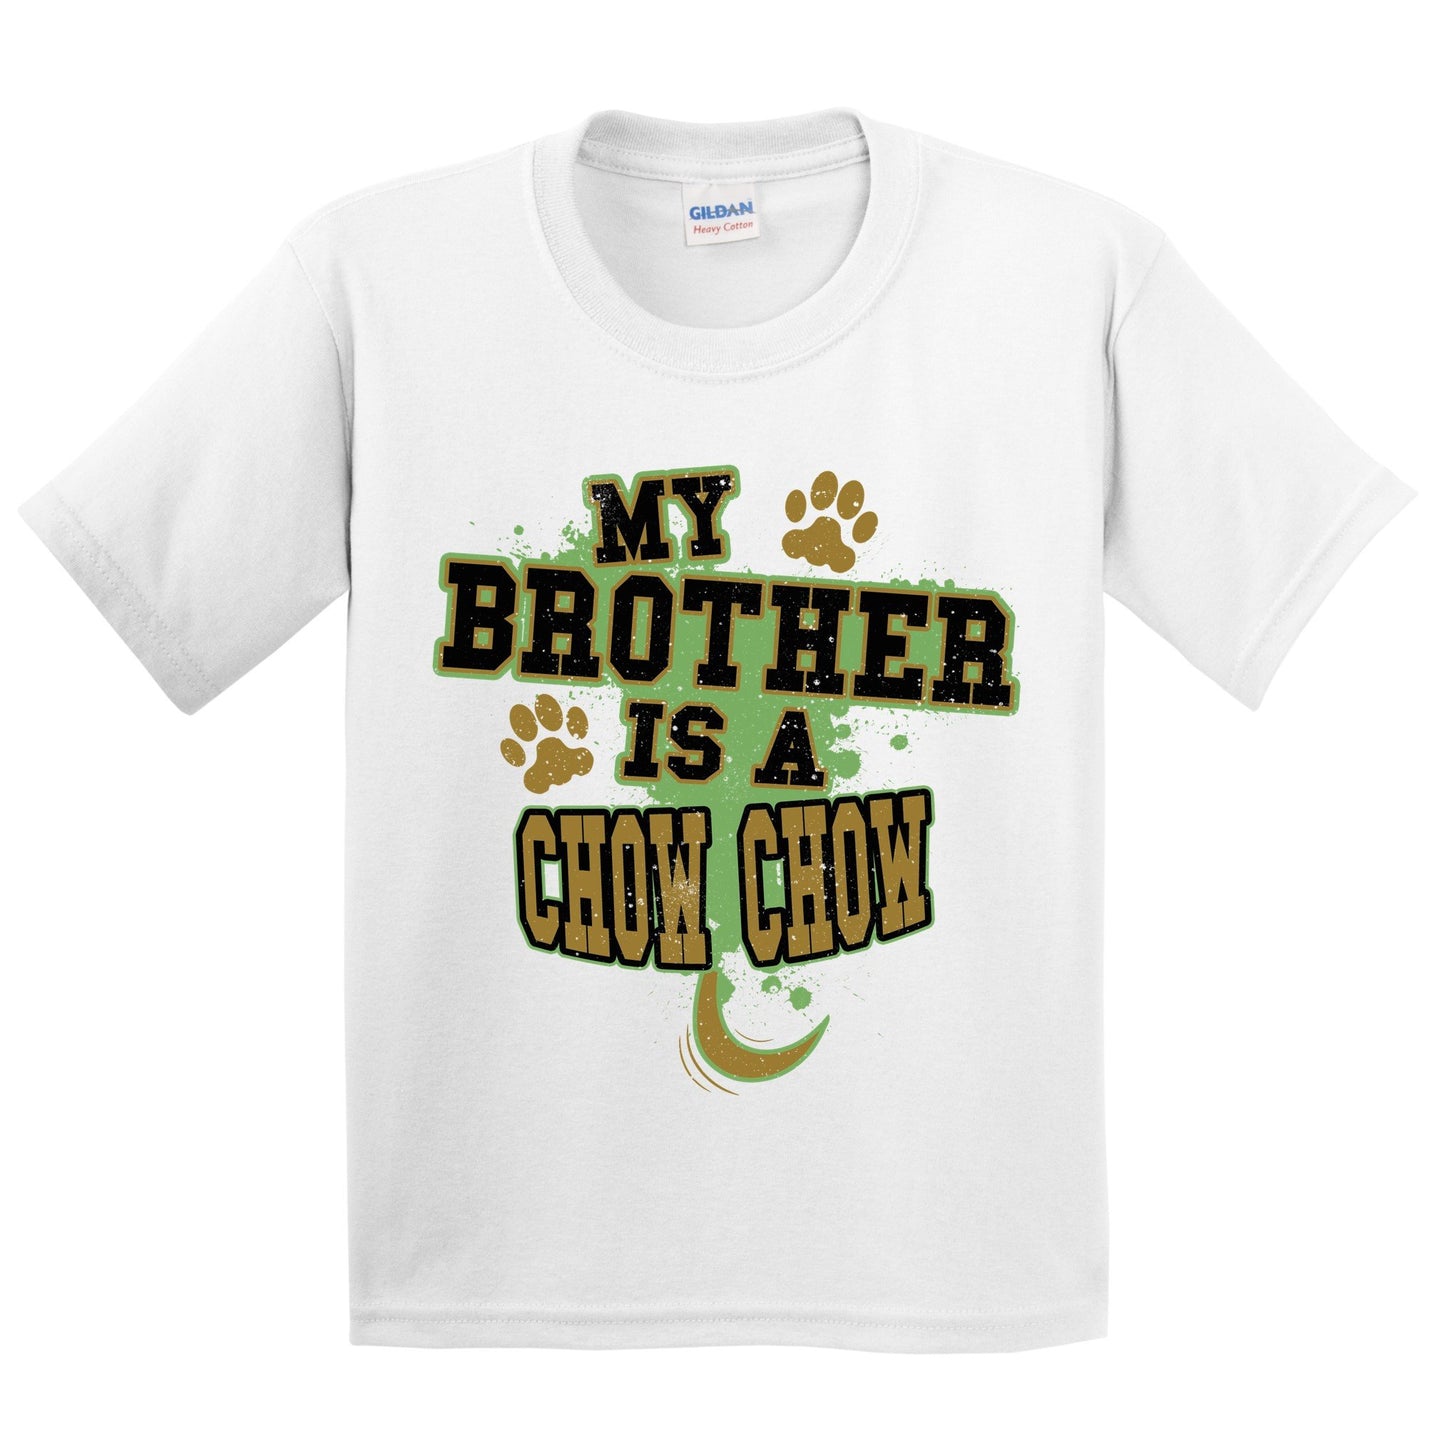 My Brother Is A Chow Chow Funny Dog Kids Youth T-Shirt